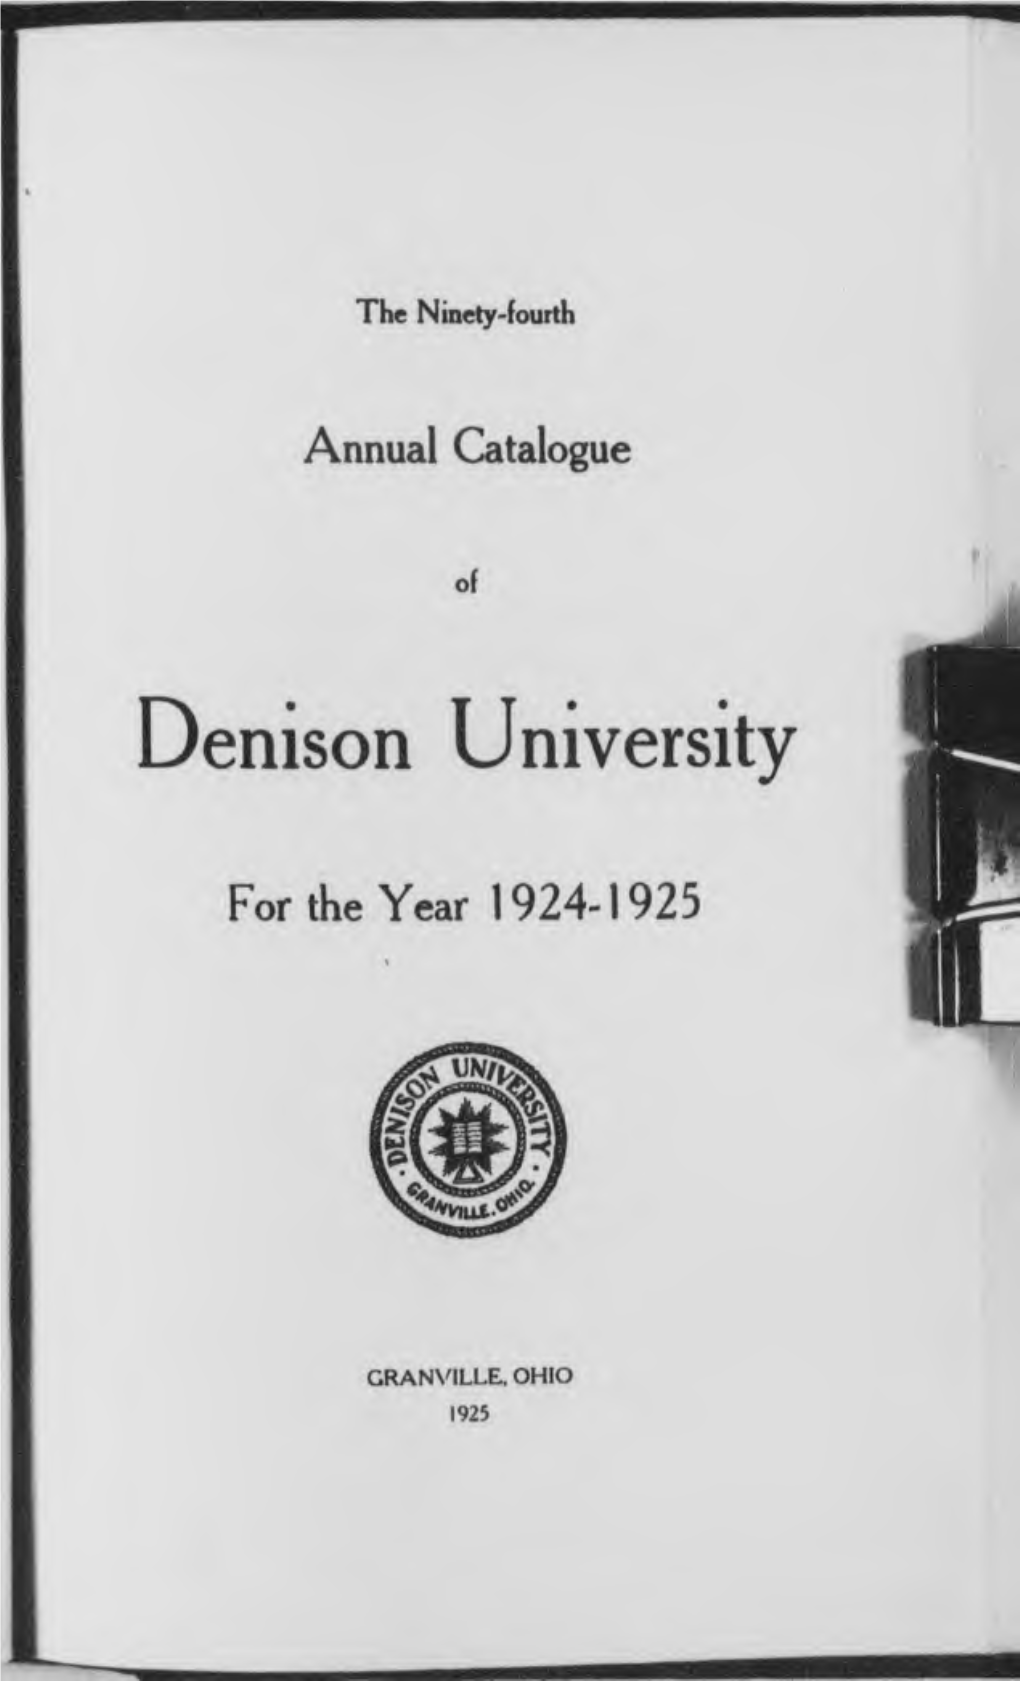 The Ninety-Fourth Annual Catalogue of Denison University for the Year